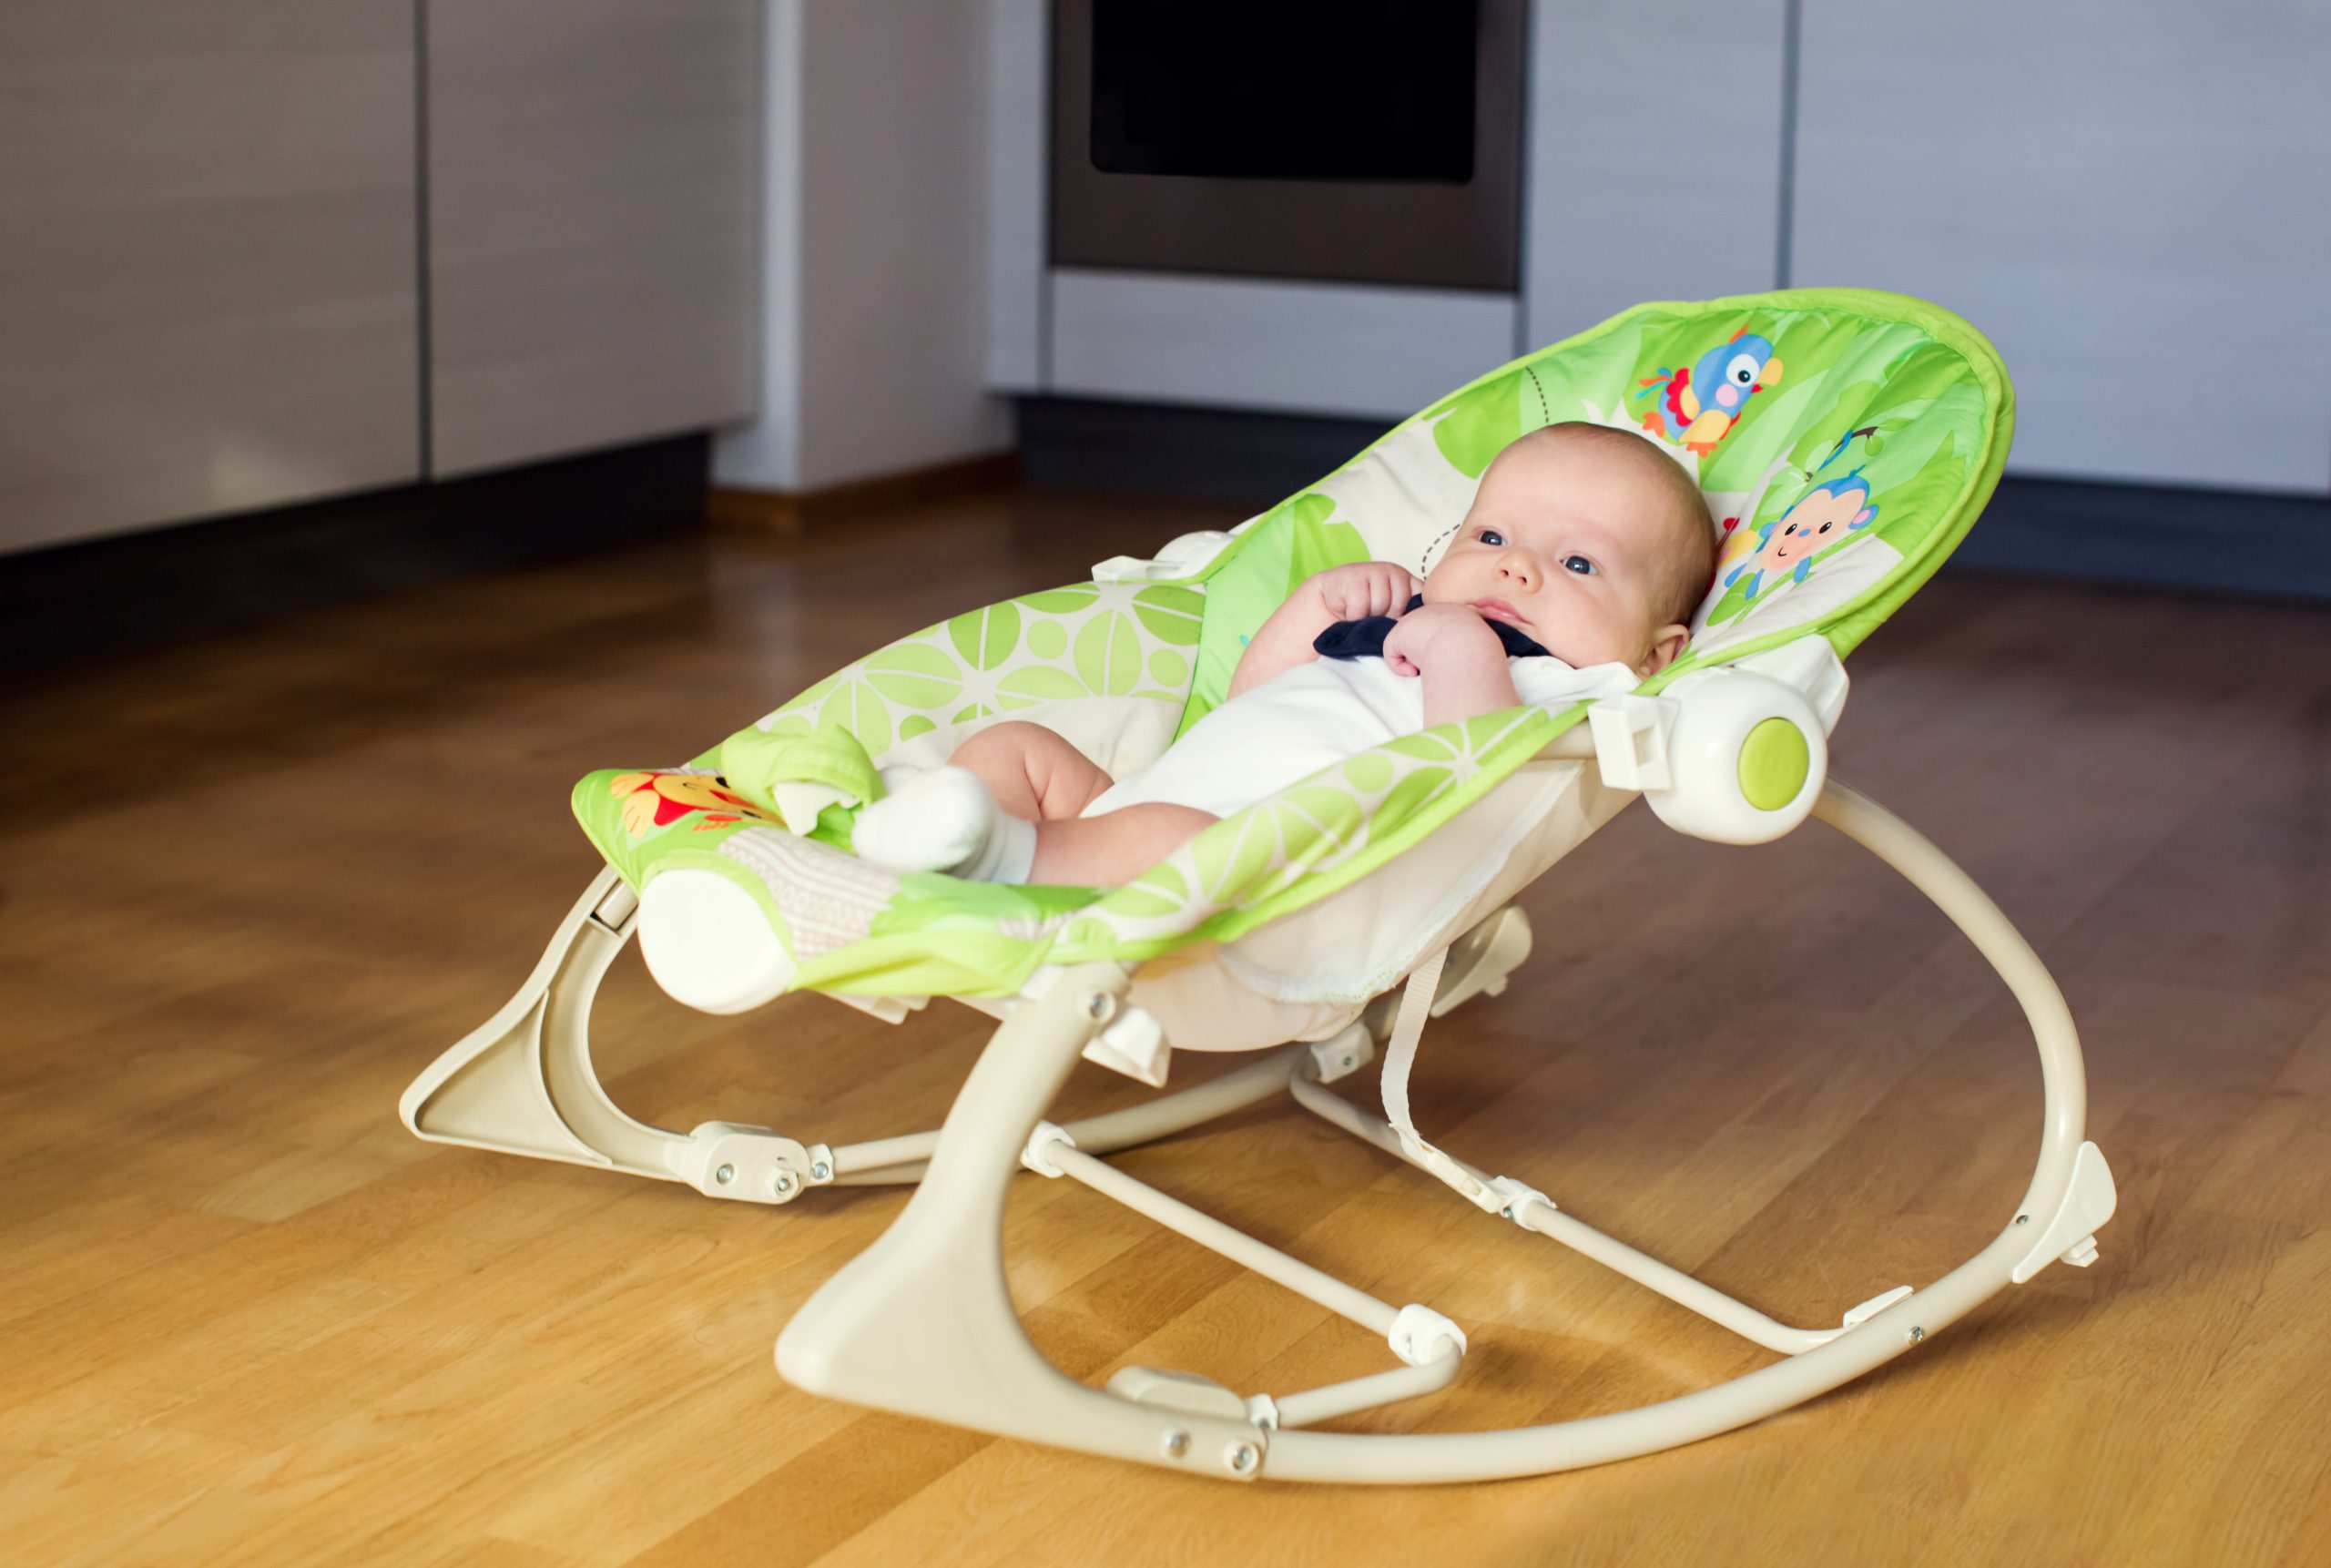 baby sleeps in the baby bouncer peacefully